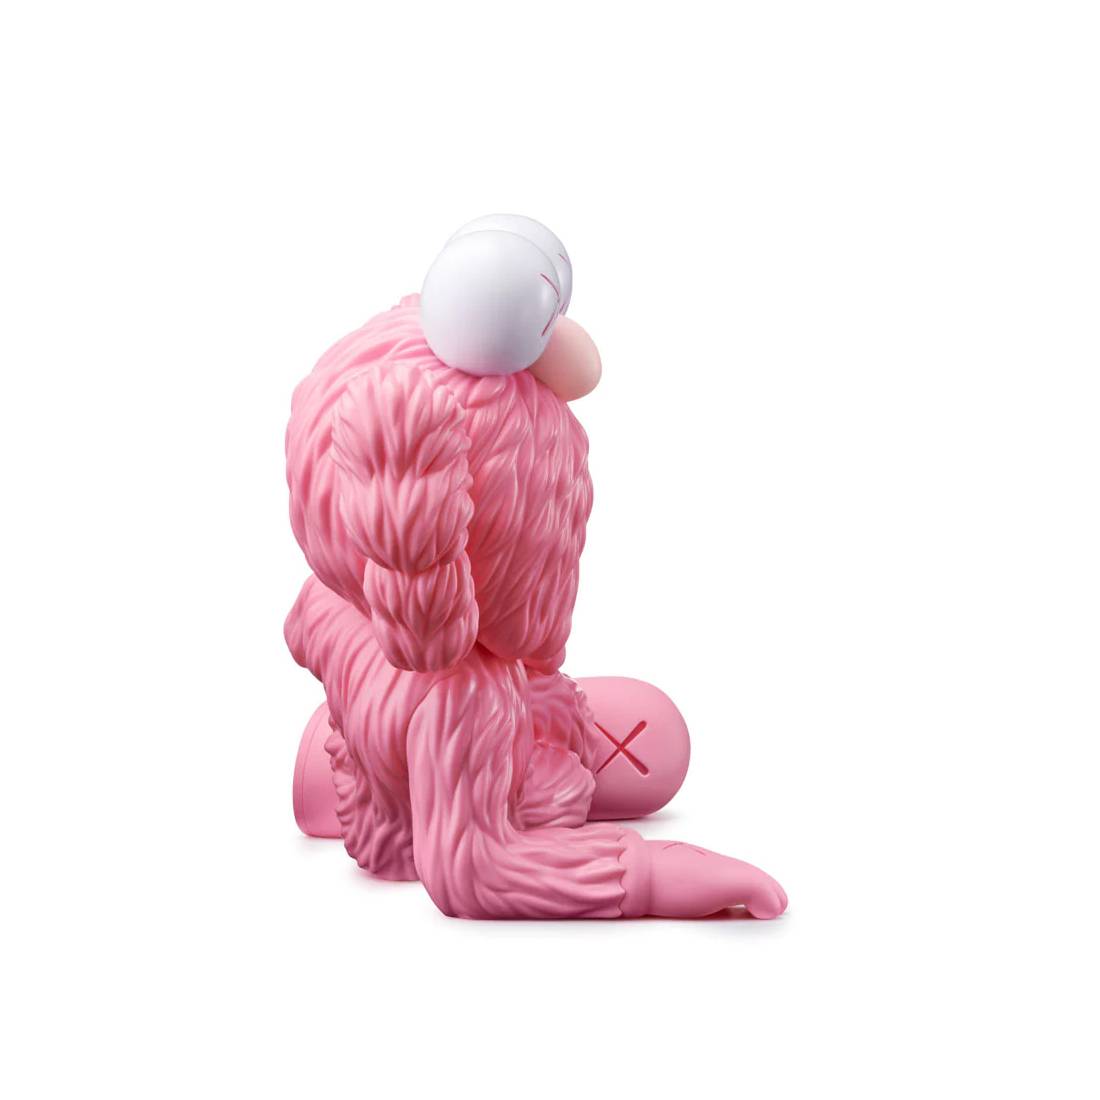 https://monkeypaw.mx/wp-content/uploads/2023/02/Kaws-Time-Off-BFF-Pink-11-figure-2023-03.jpg